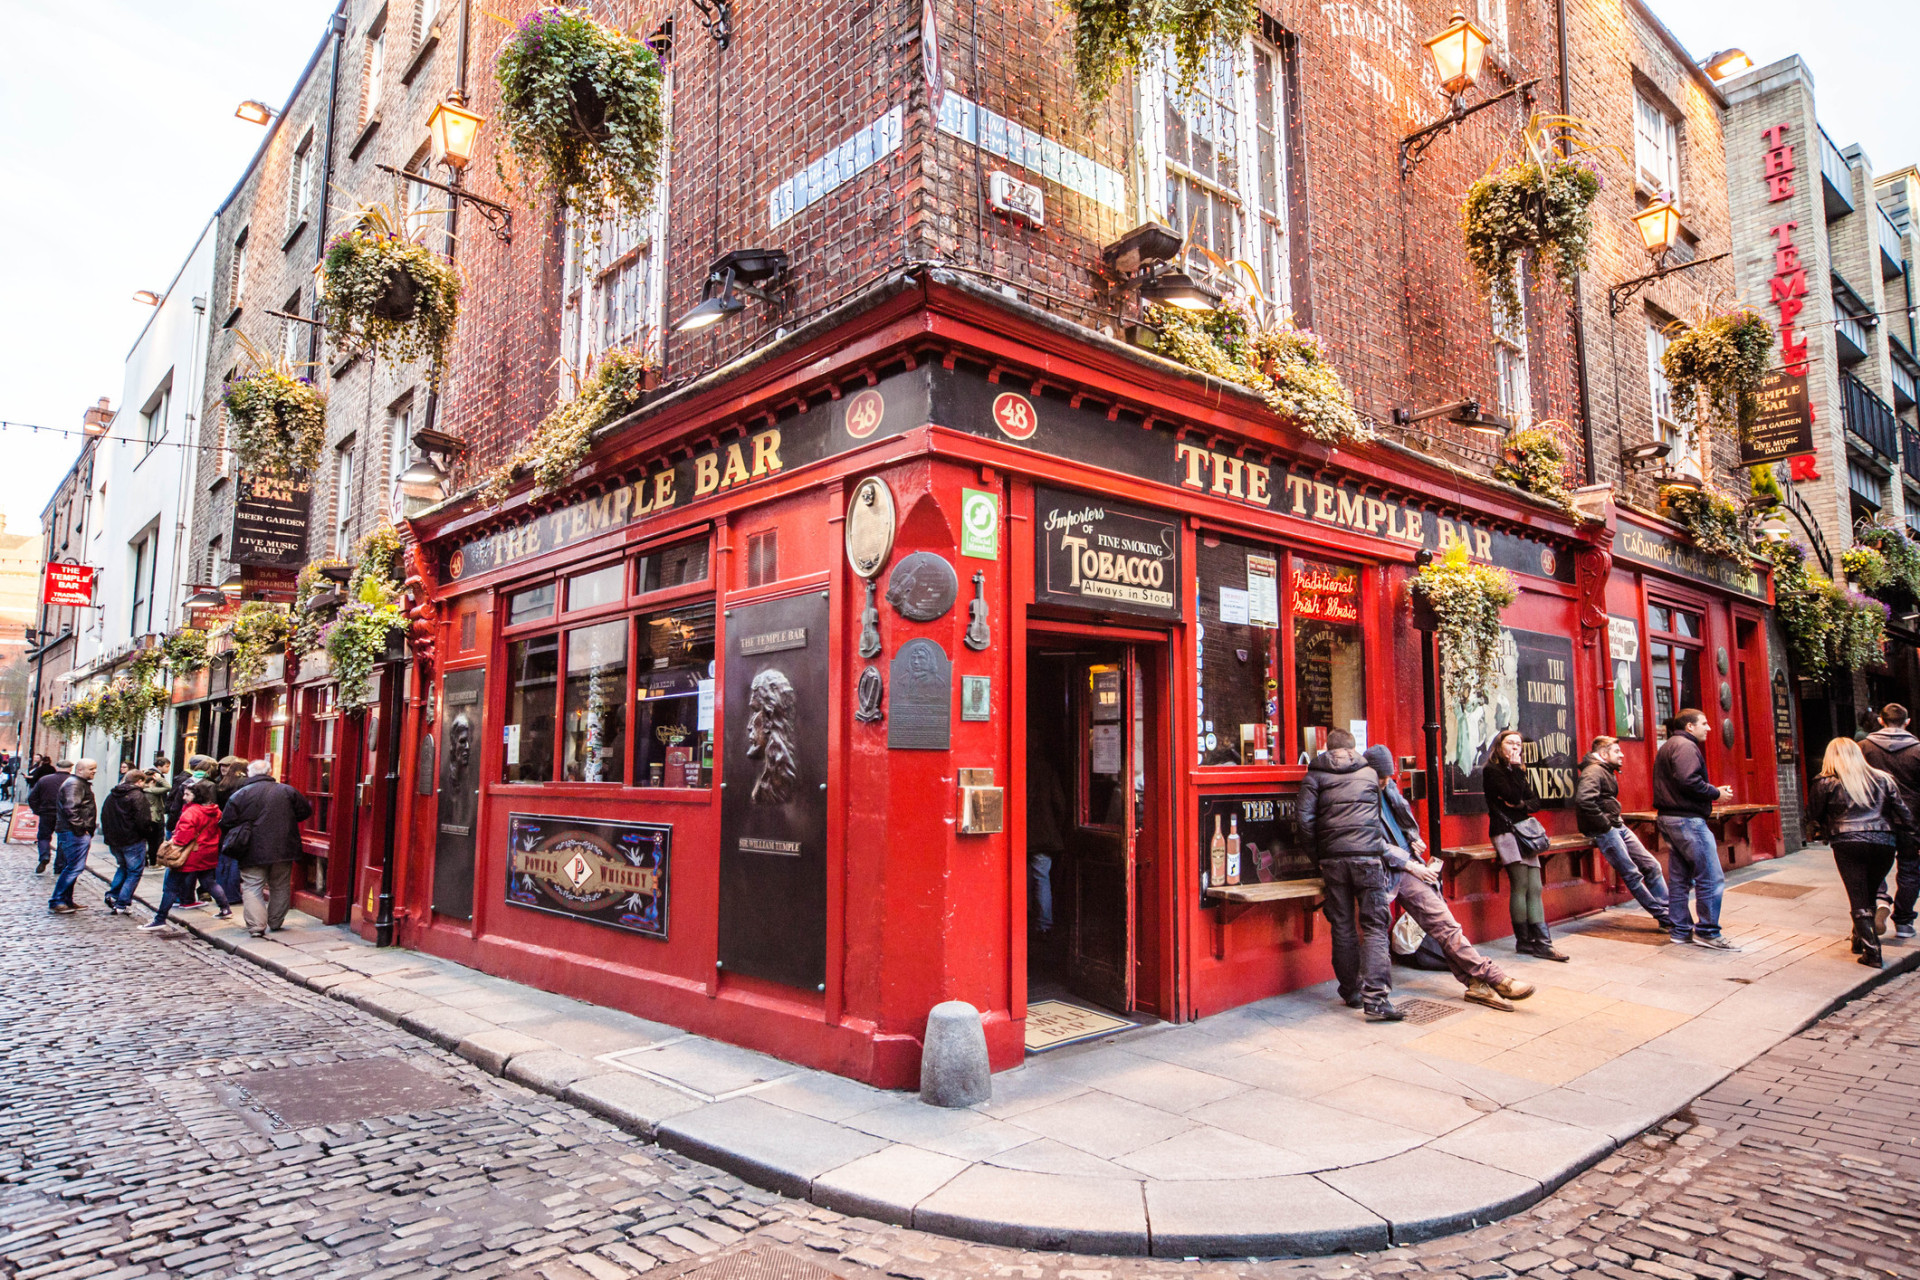 Think fun Irish pubs and people. Then think Guinness, and lots of it. The Irish capital's pub culture is next level and worth the experience.<p><a href="https://www.msn.com/en-us/community/channel/vid-7xx8mnucu55yw63we9va2gwr7uihbxwc68fxqp25x6tg4ftibpra?cvid=94631541bc0f4f89bfd59158d696ad7e">Follow us and access great exclusive content every day</a></p>